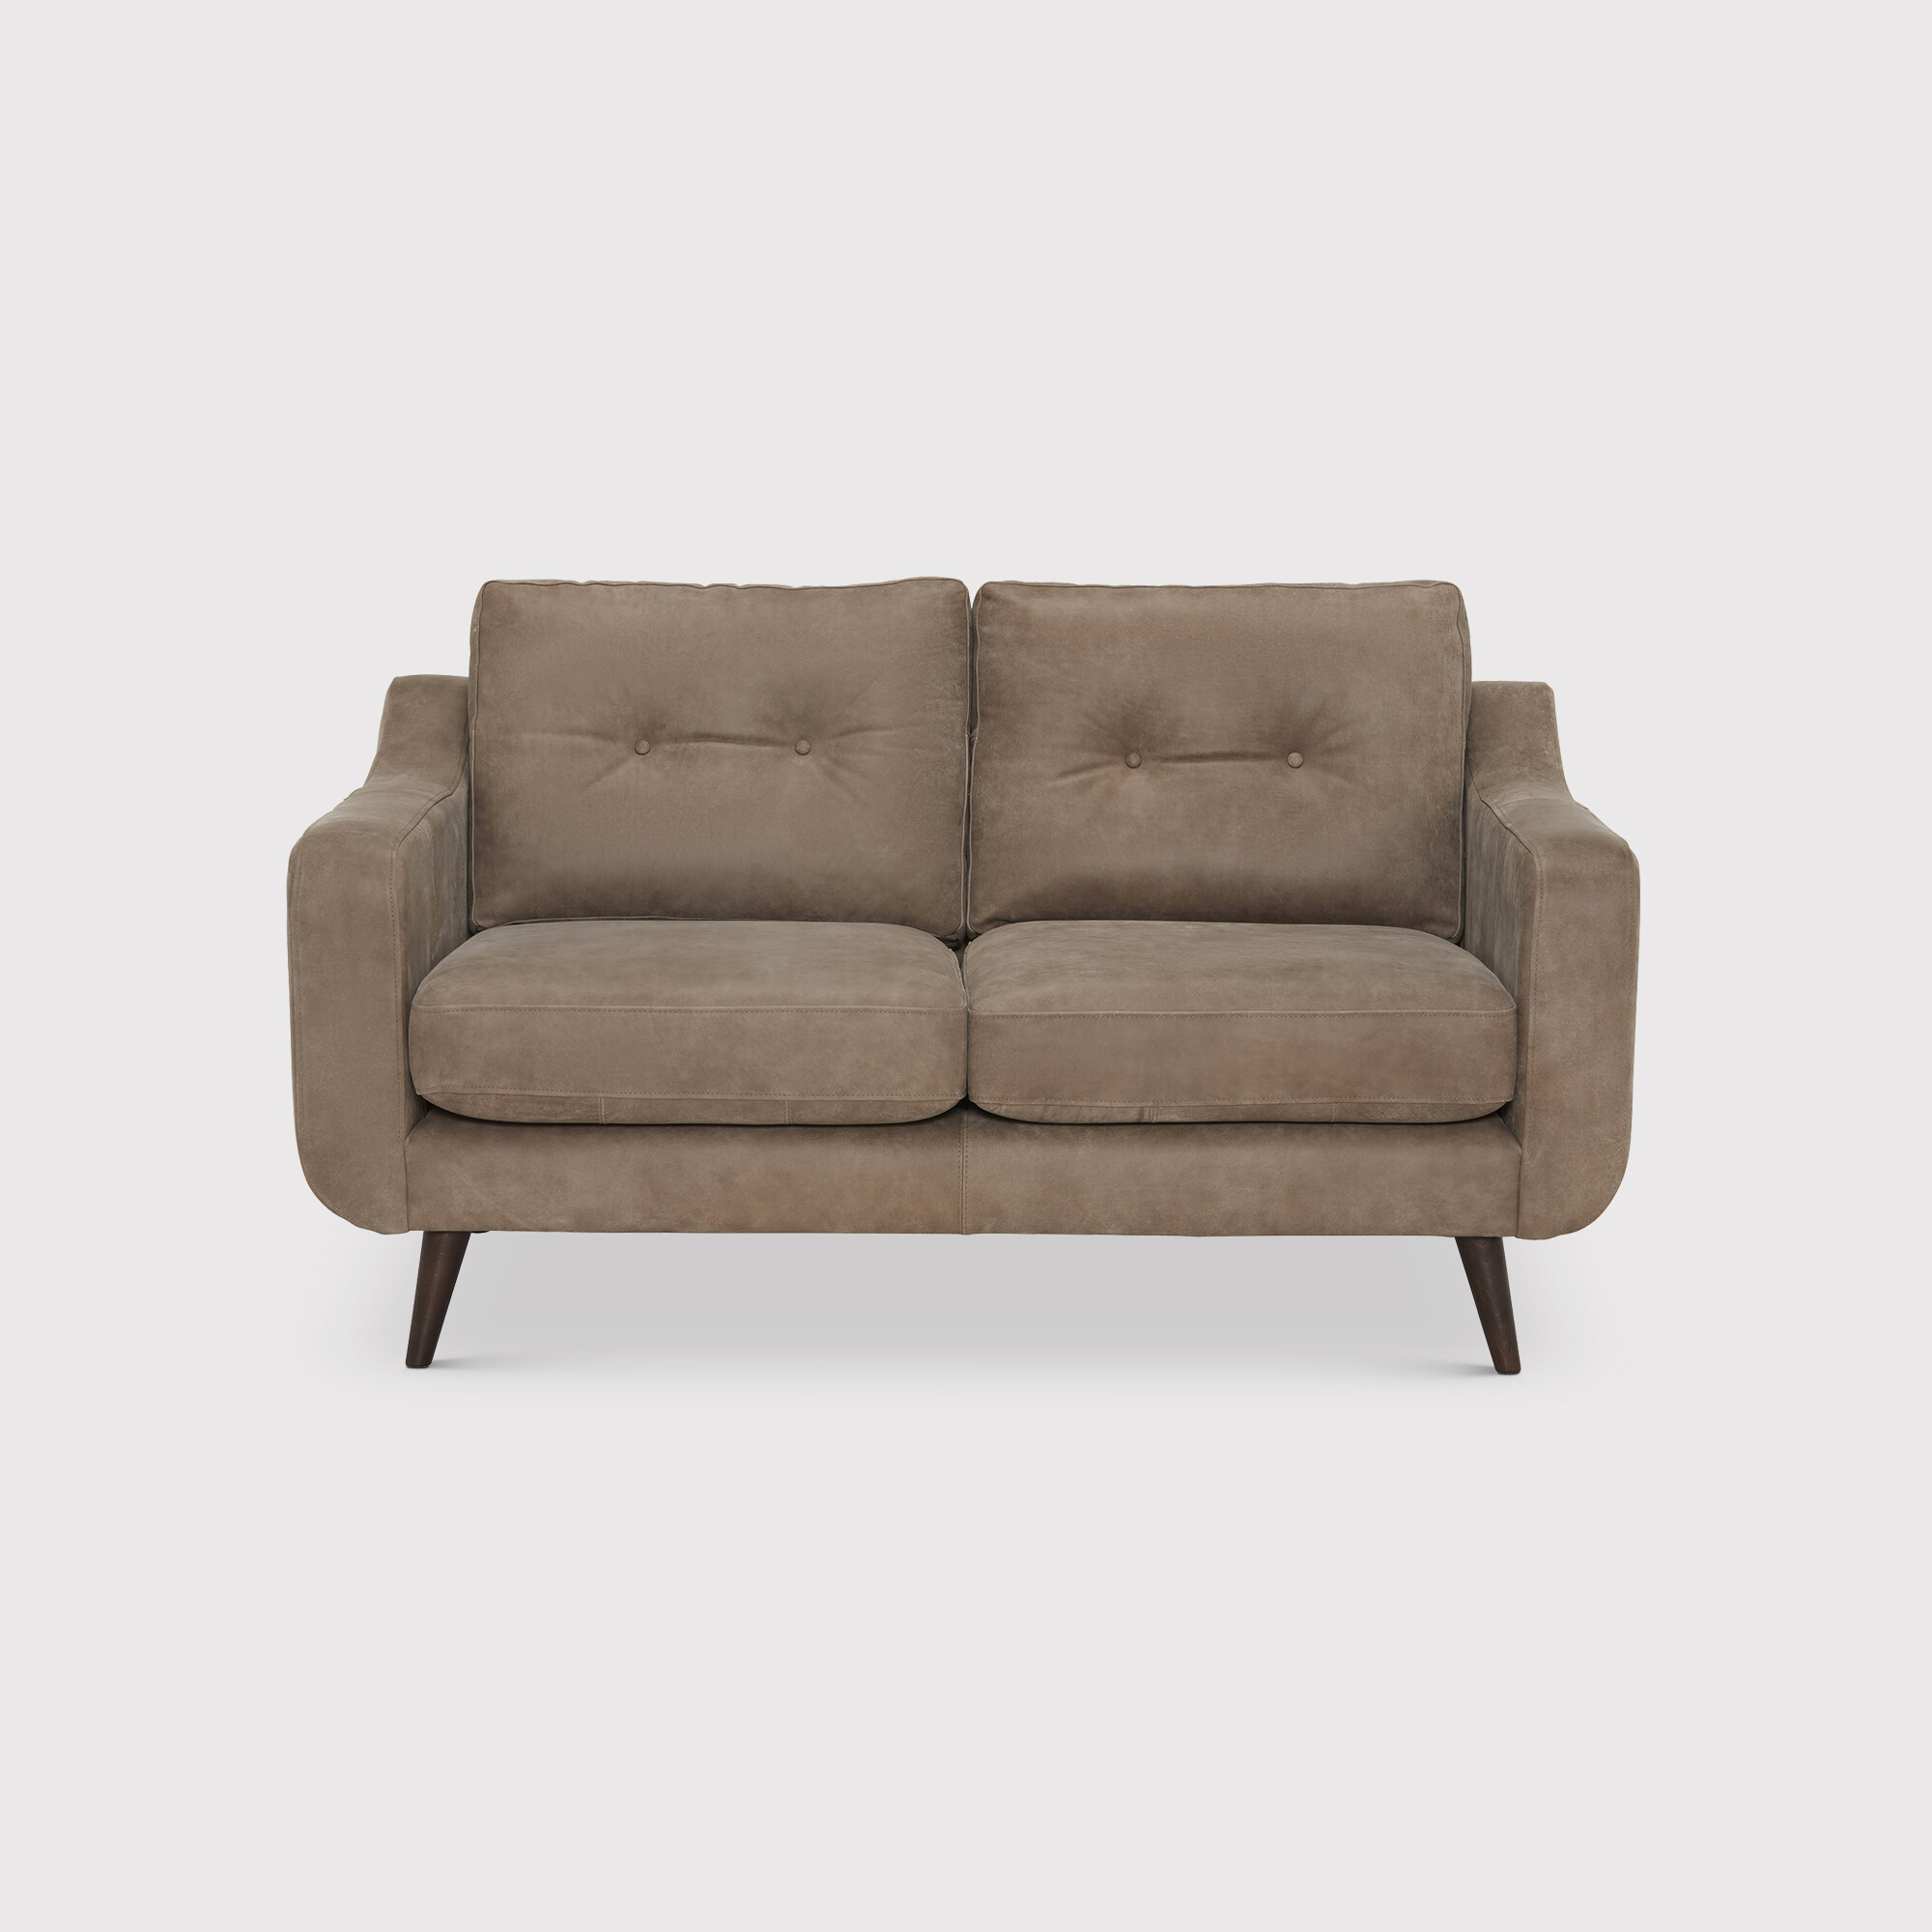 Myers Small Sofa, Brown Leather | Barker & Stonehouse